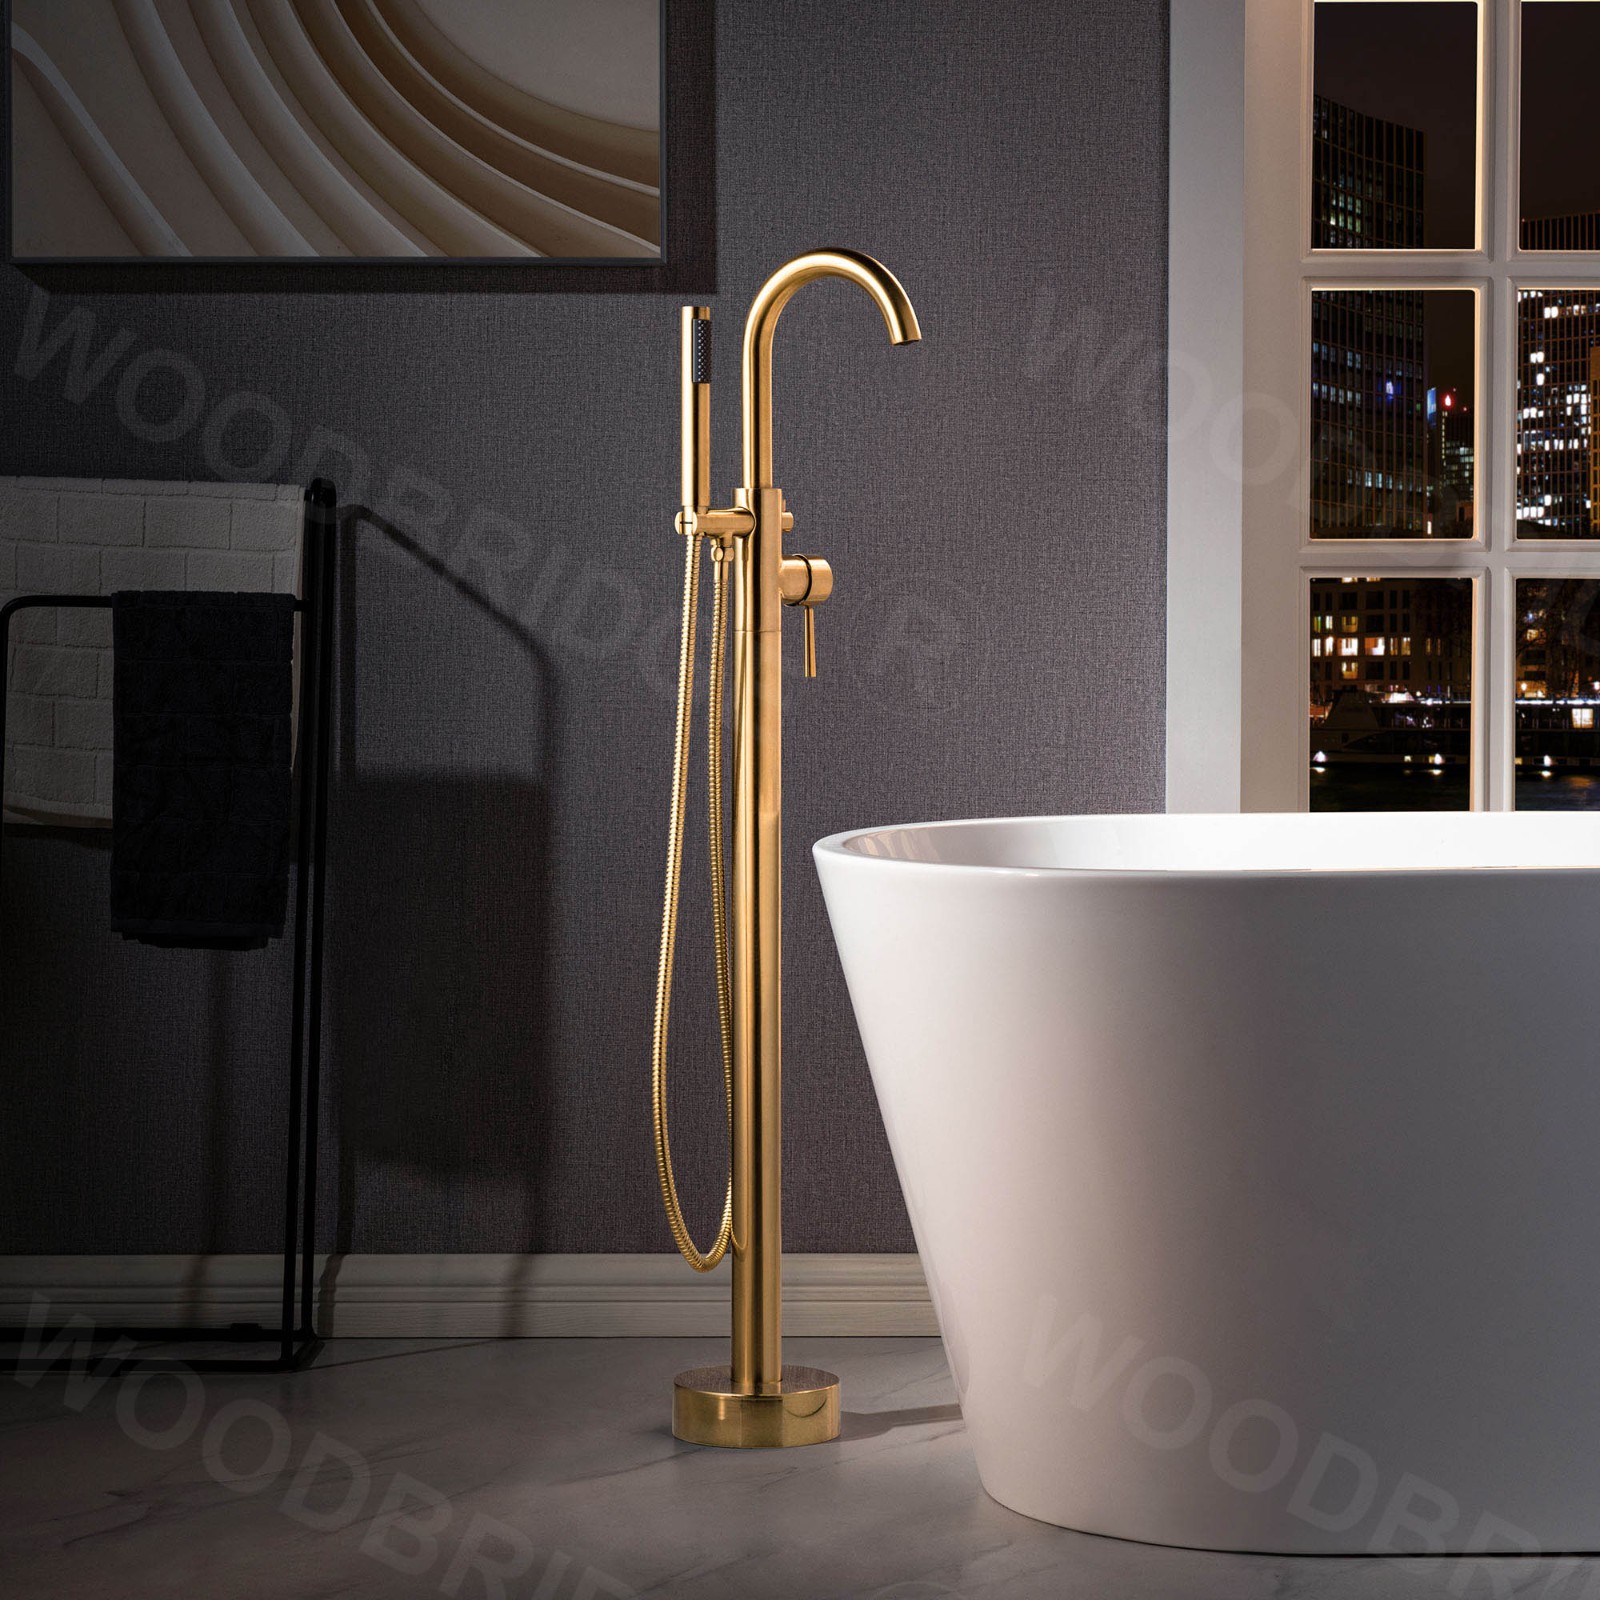  WOODBRIDGE F0026BGRD Contemporary Single Handle Floor Mount Freestanding Tub Filler Faucet with Cylinder Shape Hand shower in Brushed Gold Finish._4191